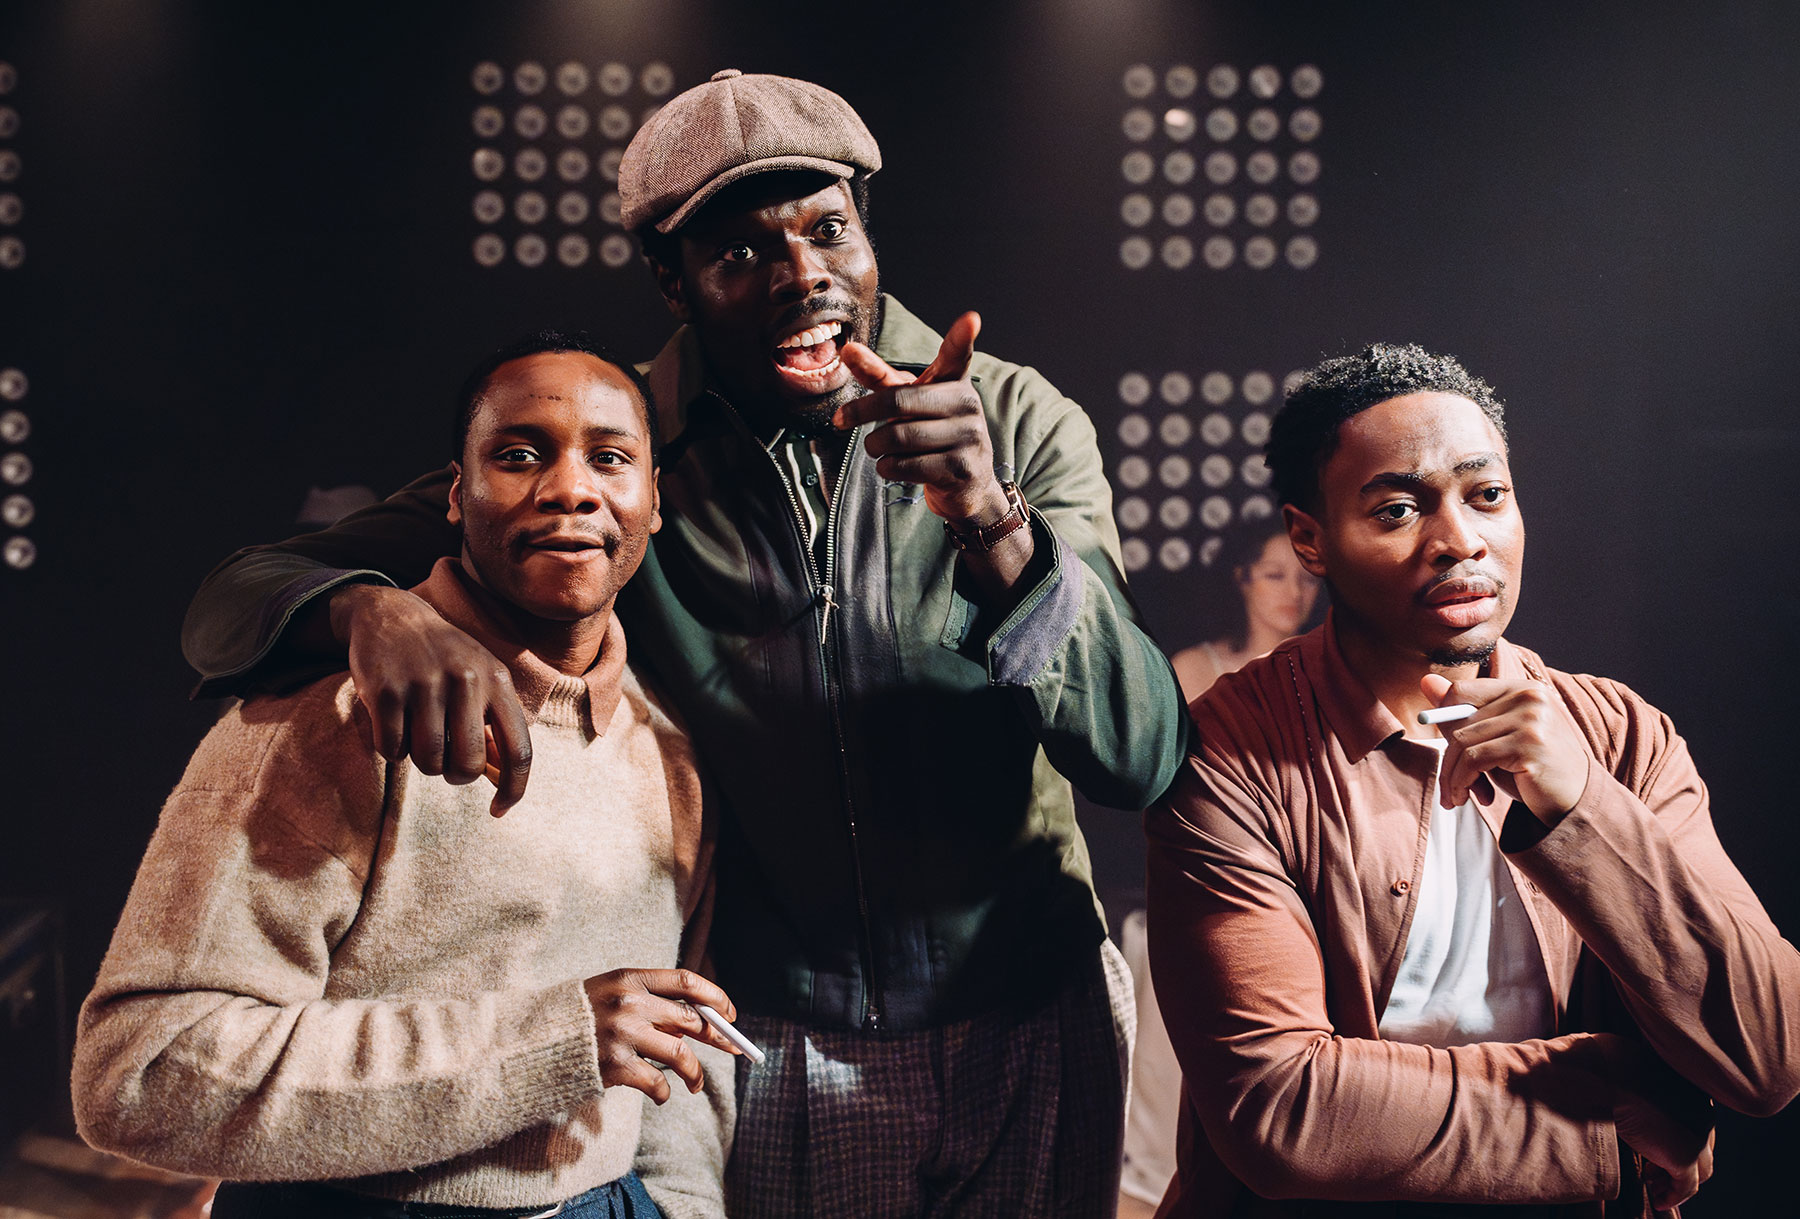 Tobi Bakare, Gilbert Kyem Jnr, Gamba Cole in The Lonely Londoners at Jermyn Street Theatre, photo by Alex Brenner